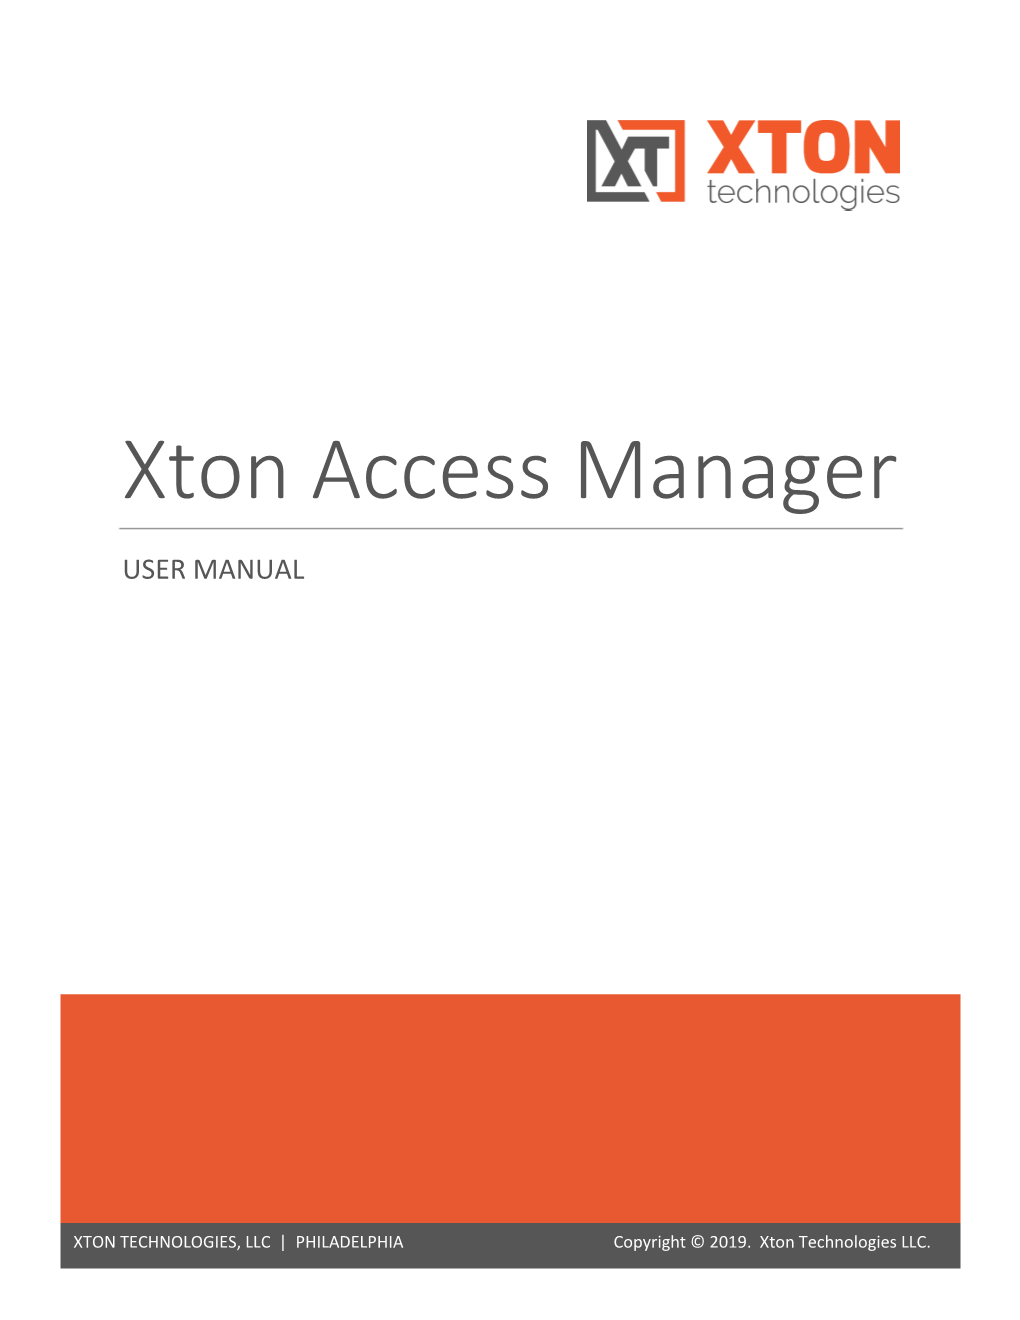 Xton Access Manager User Manual